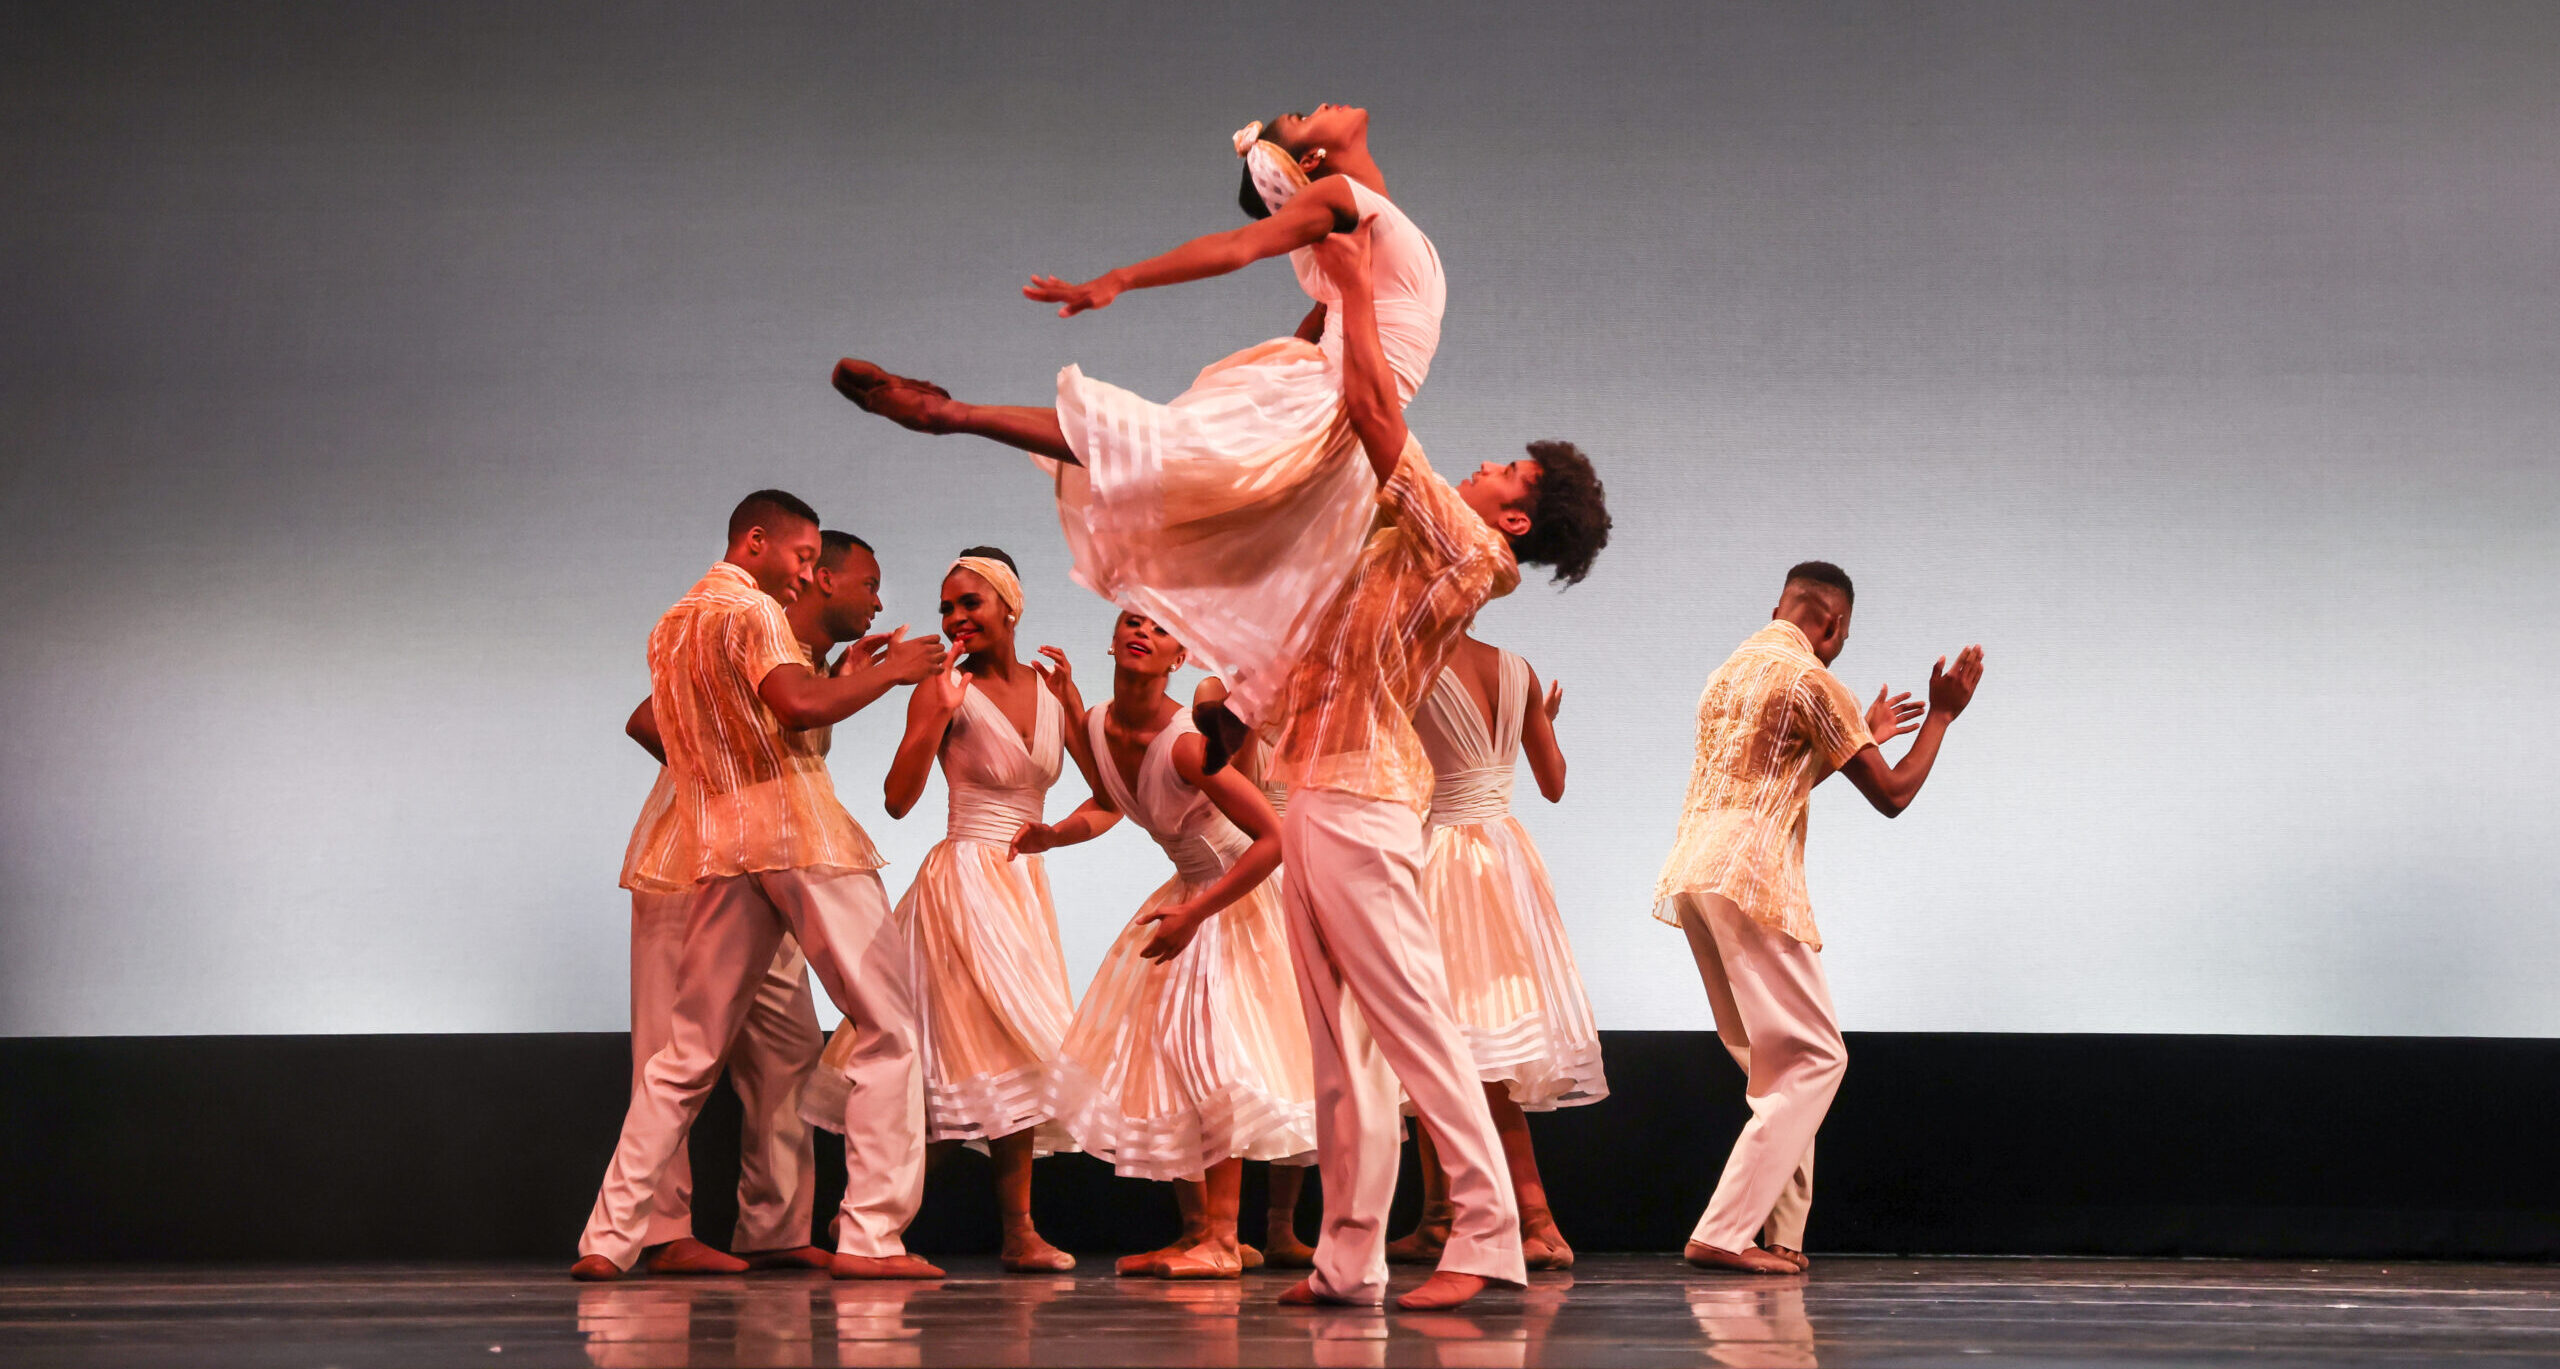 An ensemble of dancers from Dance Theatre of Harlem perform onstage in front of an ombré gray backdrop. In the middle, a female dancer performing as Hazel Scott is lifted and arches back, her head lifted to the sky. The dancers all wear white period-specific dresses and suits.